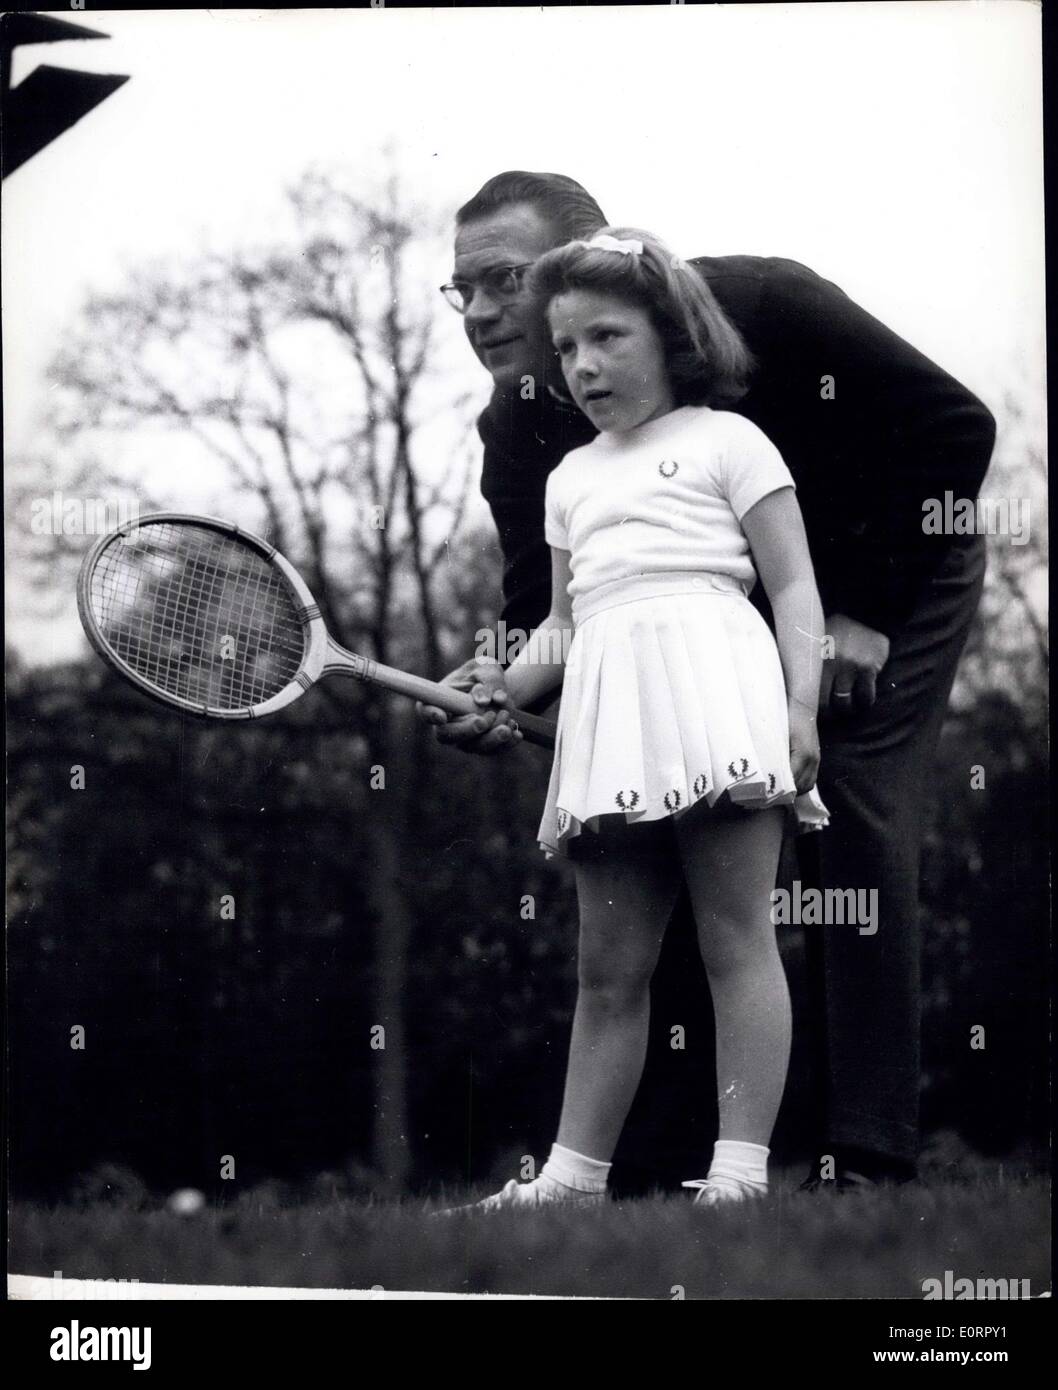 May 03, 1960 - Expert tuition for Five-year old Helen.: Jaroslav Drobny, the former tennis star, pictured giving instruction to Stock Photo